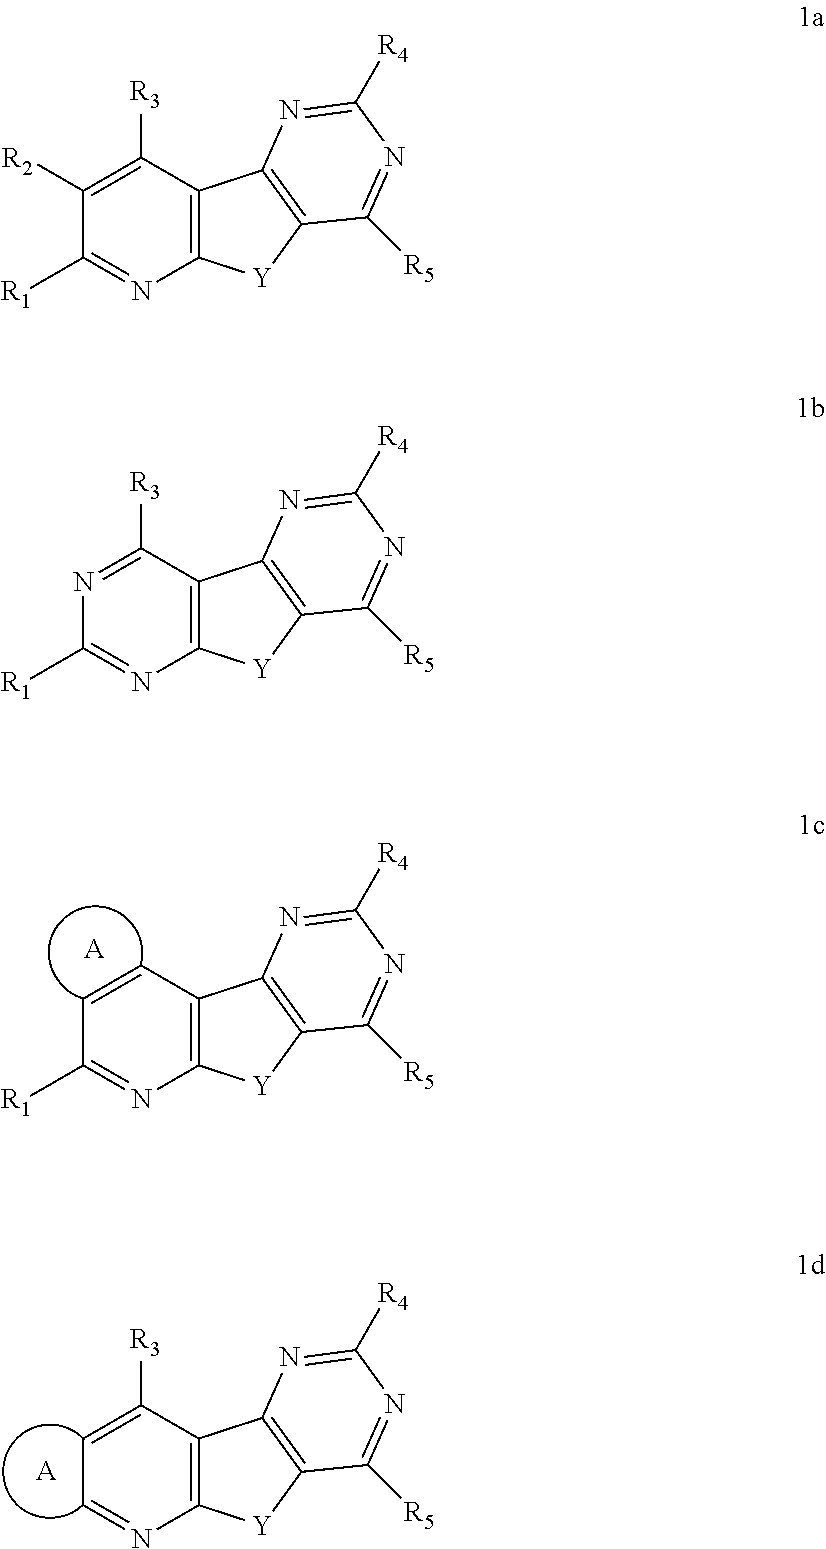 SUBSTITUTED PYRIDO [3', 2': 4, 5] THIENO [3, 2-D] PYRIMIDINES AND PYRIDO [3', 2': 4, 5] FURO [3, 2-D] PYRIMIDINES USED AS INHIBITORS OF THE PDE-4 AND/OR THE RELEASE OF TNF-alpha